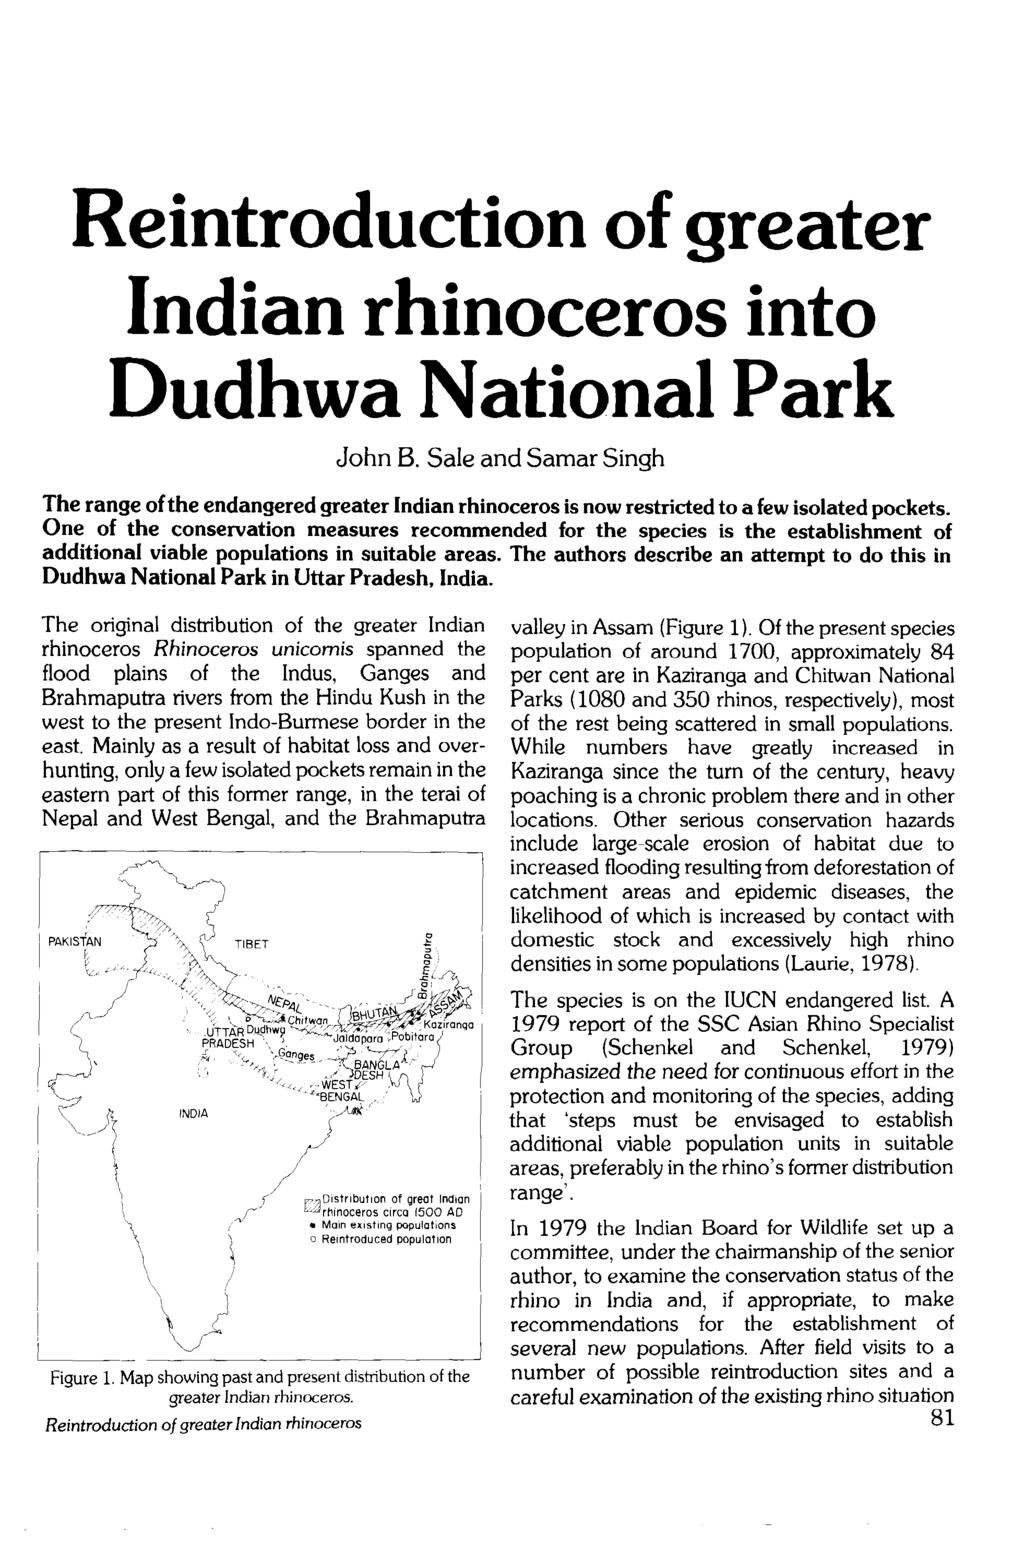 Reintroduction of greater Indian rhinoceros into Dudhwa National Park John B. Sale and Samar Singh The range of the endangered greater Indian rhinoceros is now restricted to a few isolated pockets.